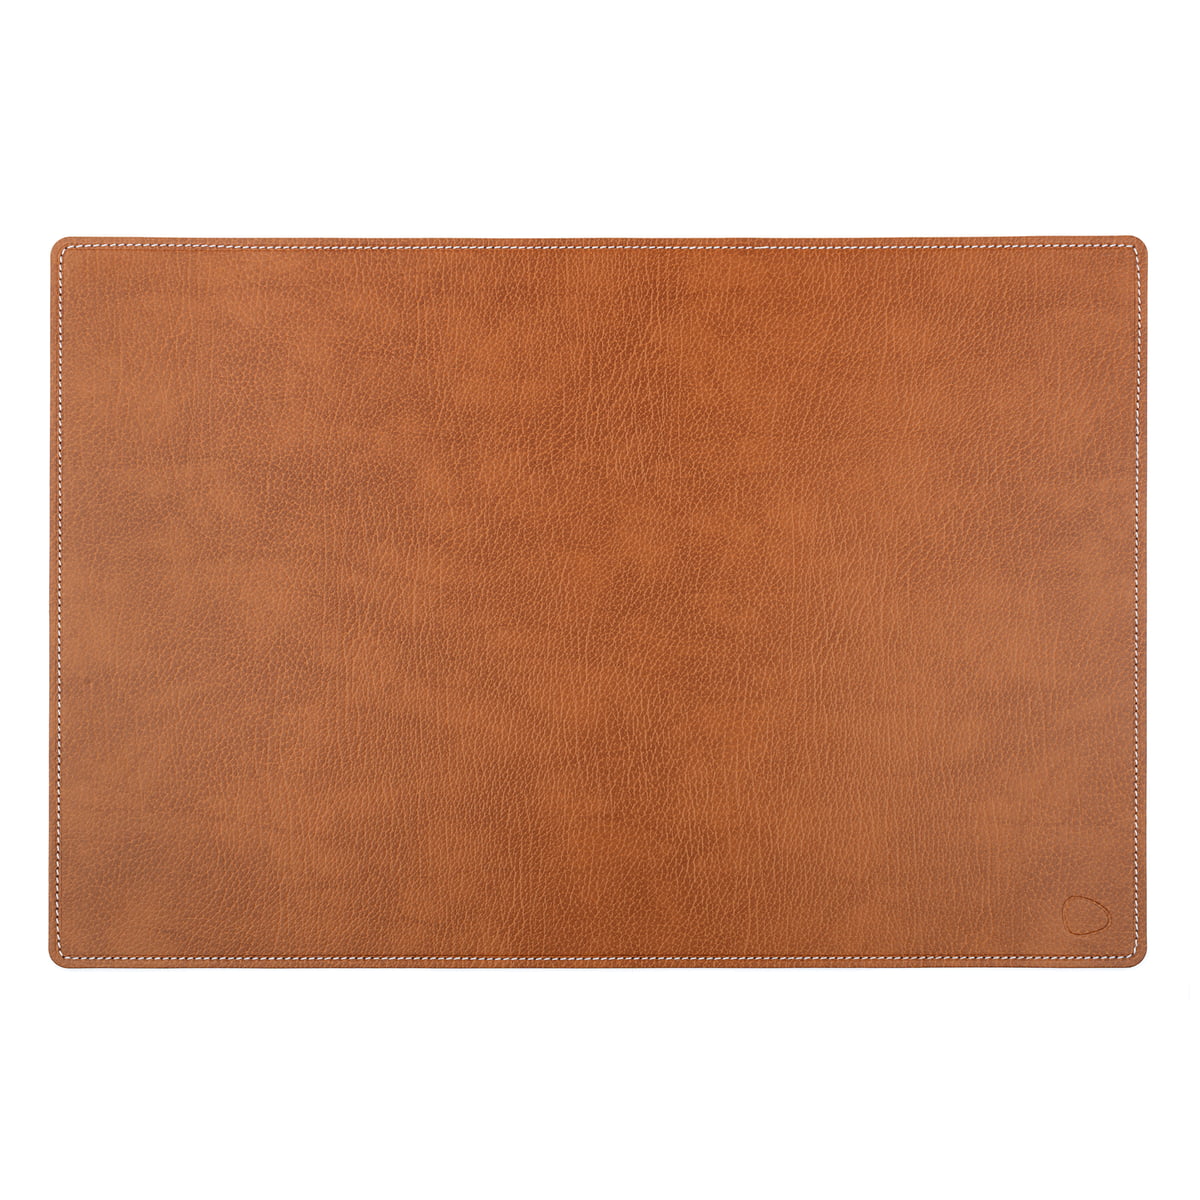 Leather Desk Pad By Linddna